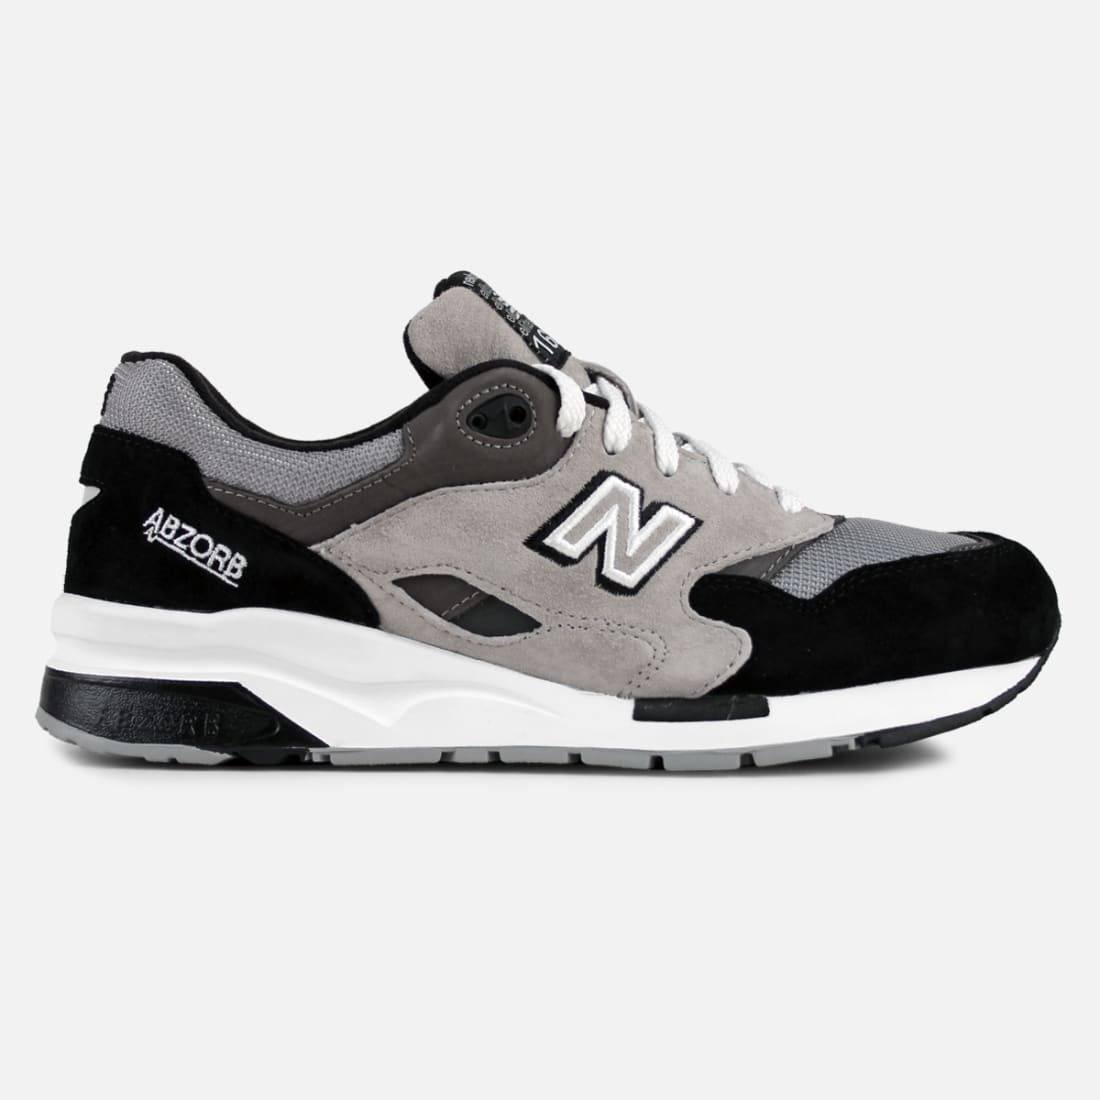 New Balance 1600 | New Balance | Sneaker News, Launches, Release ...